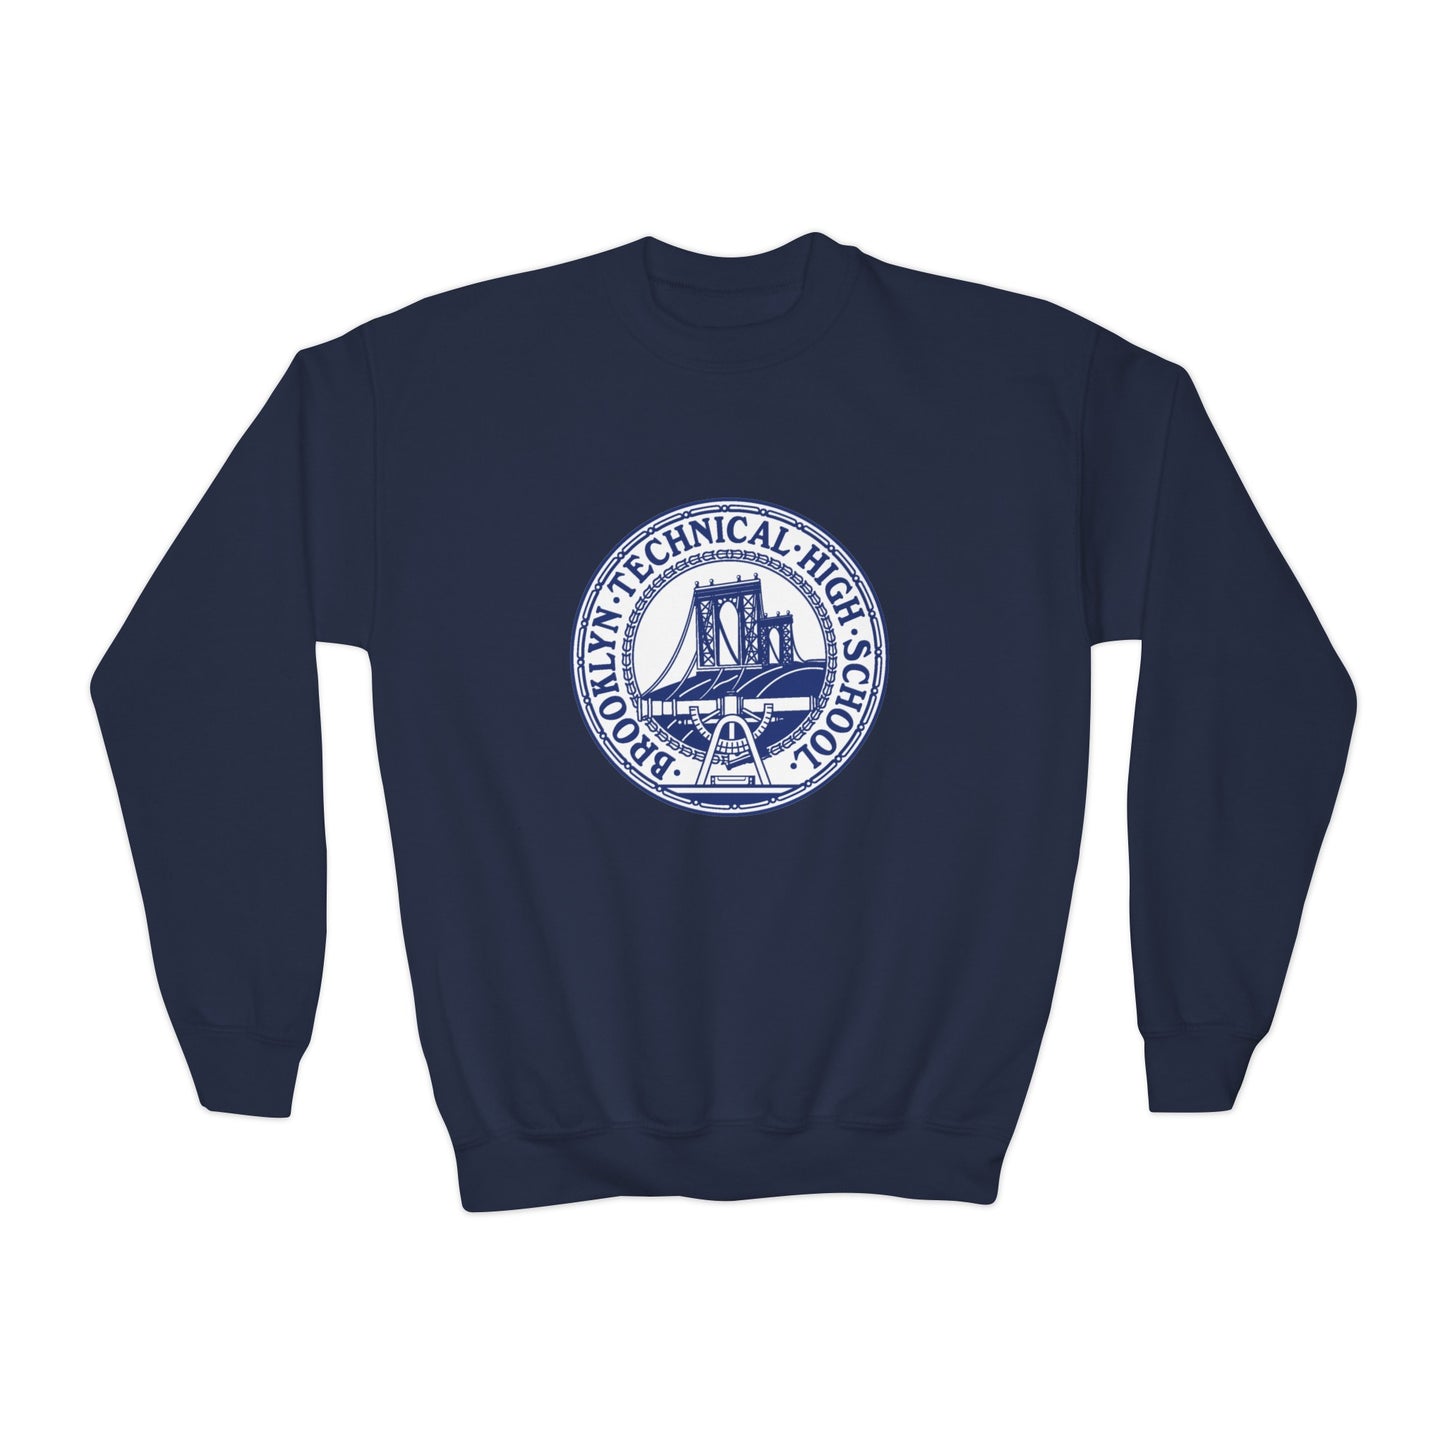 Family - Classic Tech Seal With Background - Youth Crewneck Sweatshirt